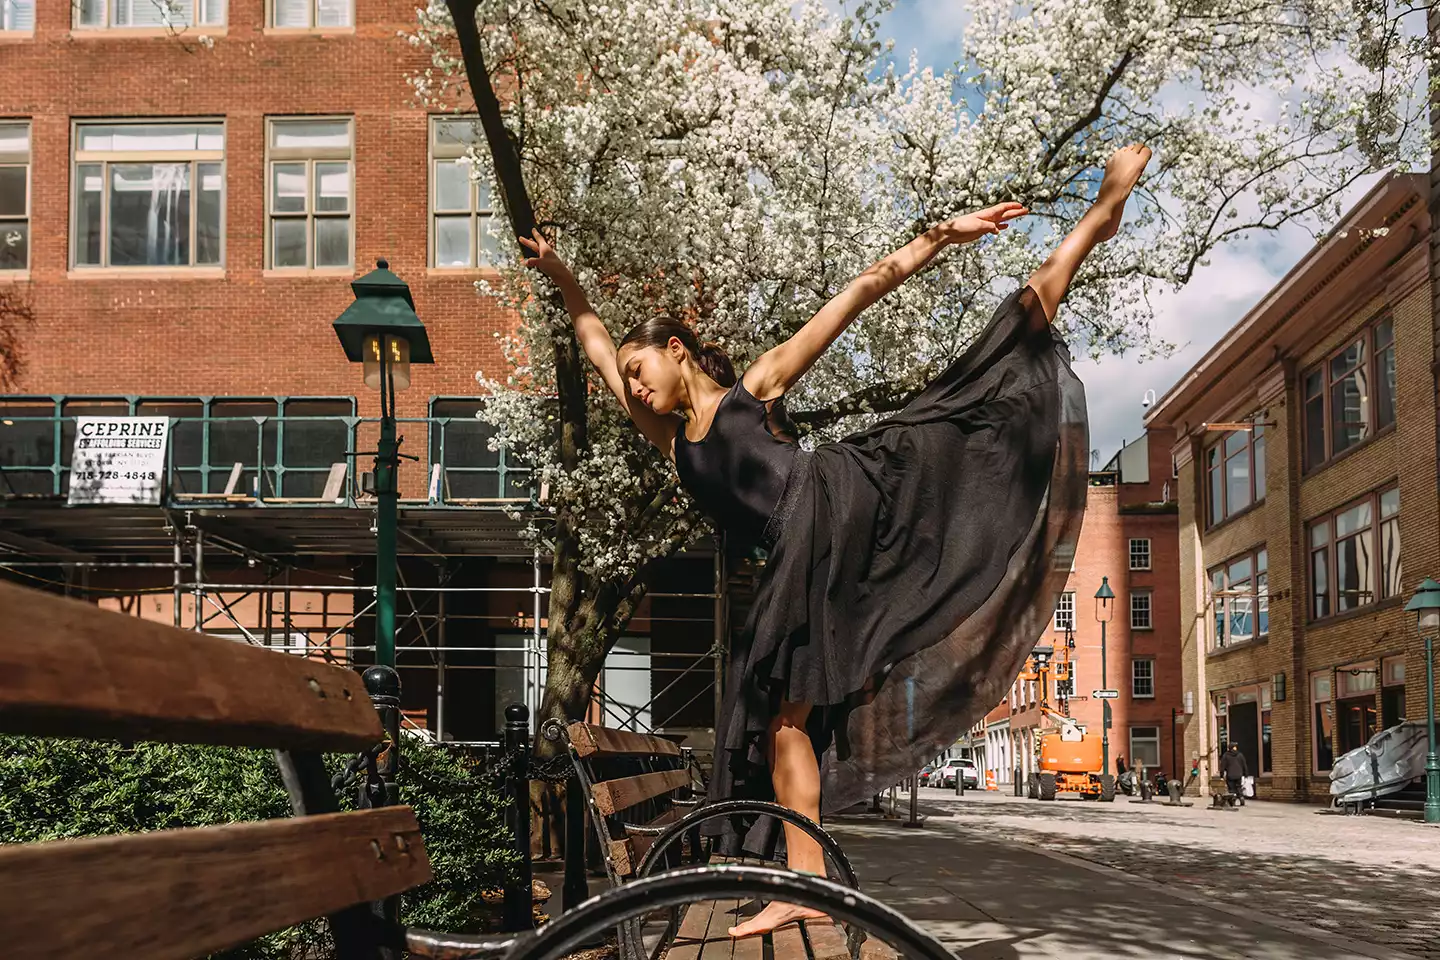 A DDF beautiful dancer showing her stunning arabesque on a Spring Day at the Seaport!